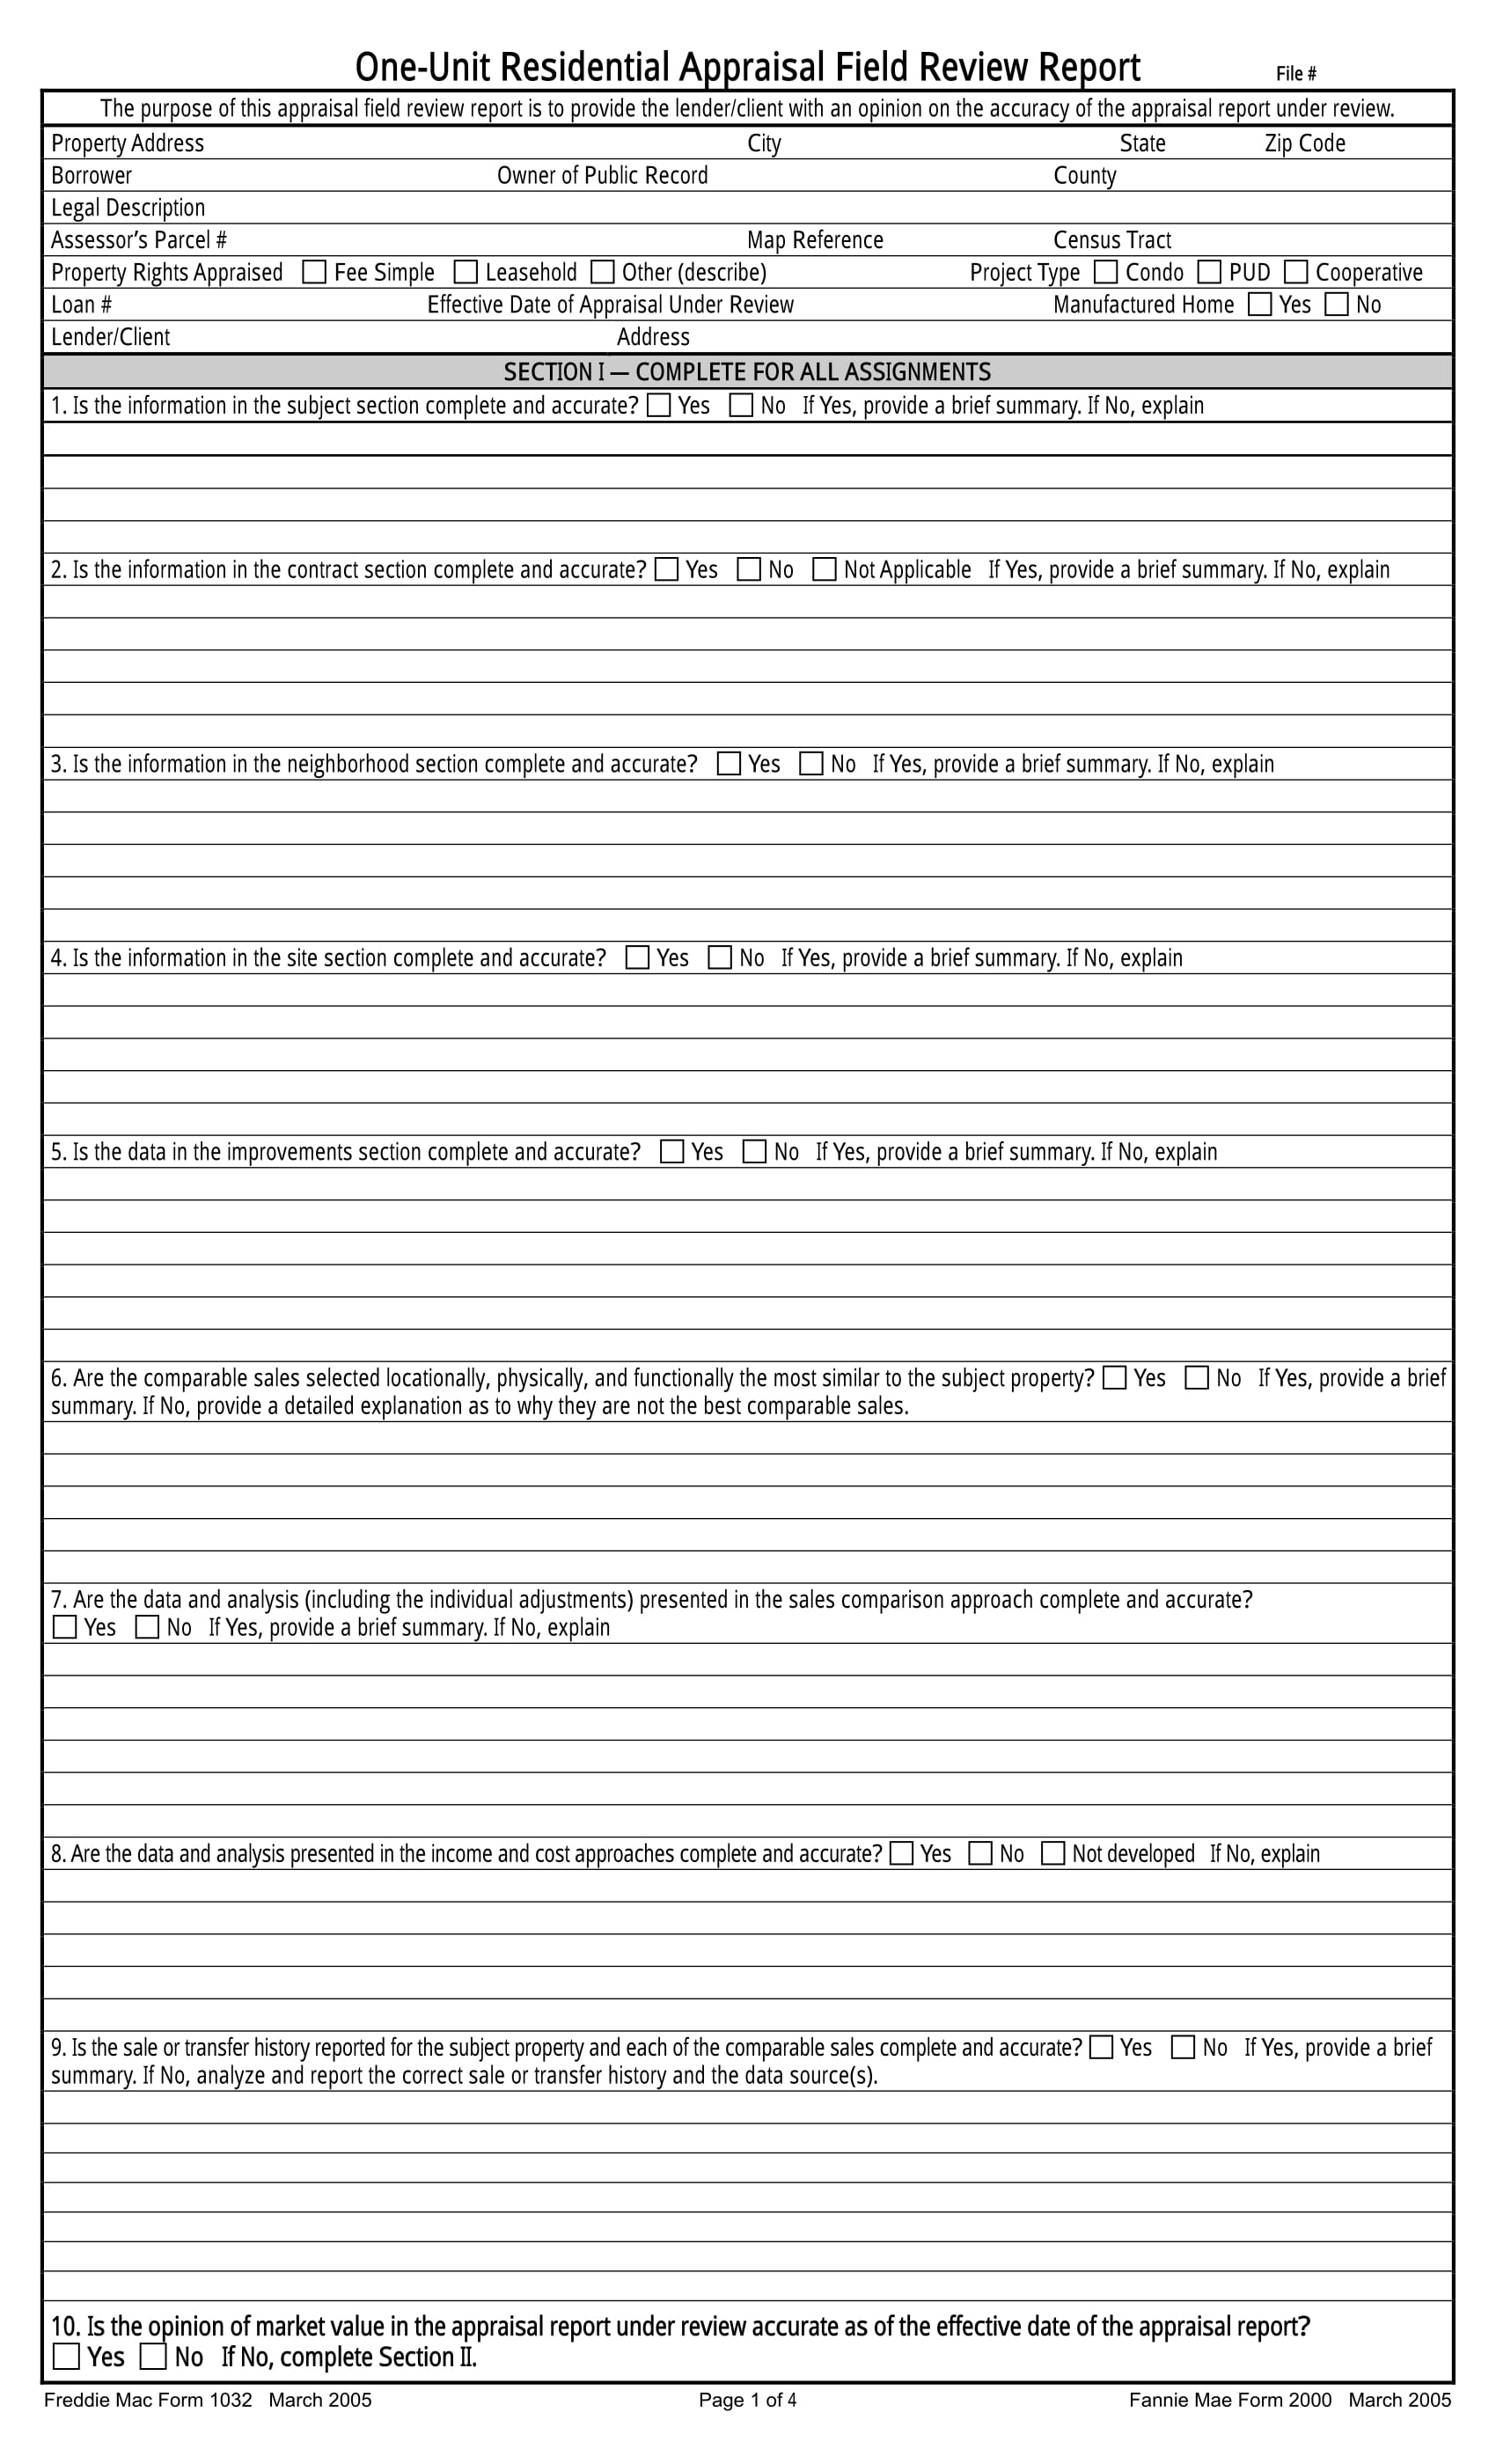 appraisal field review report form 1